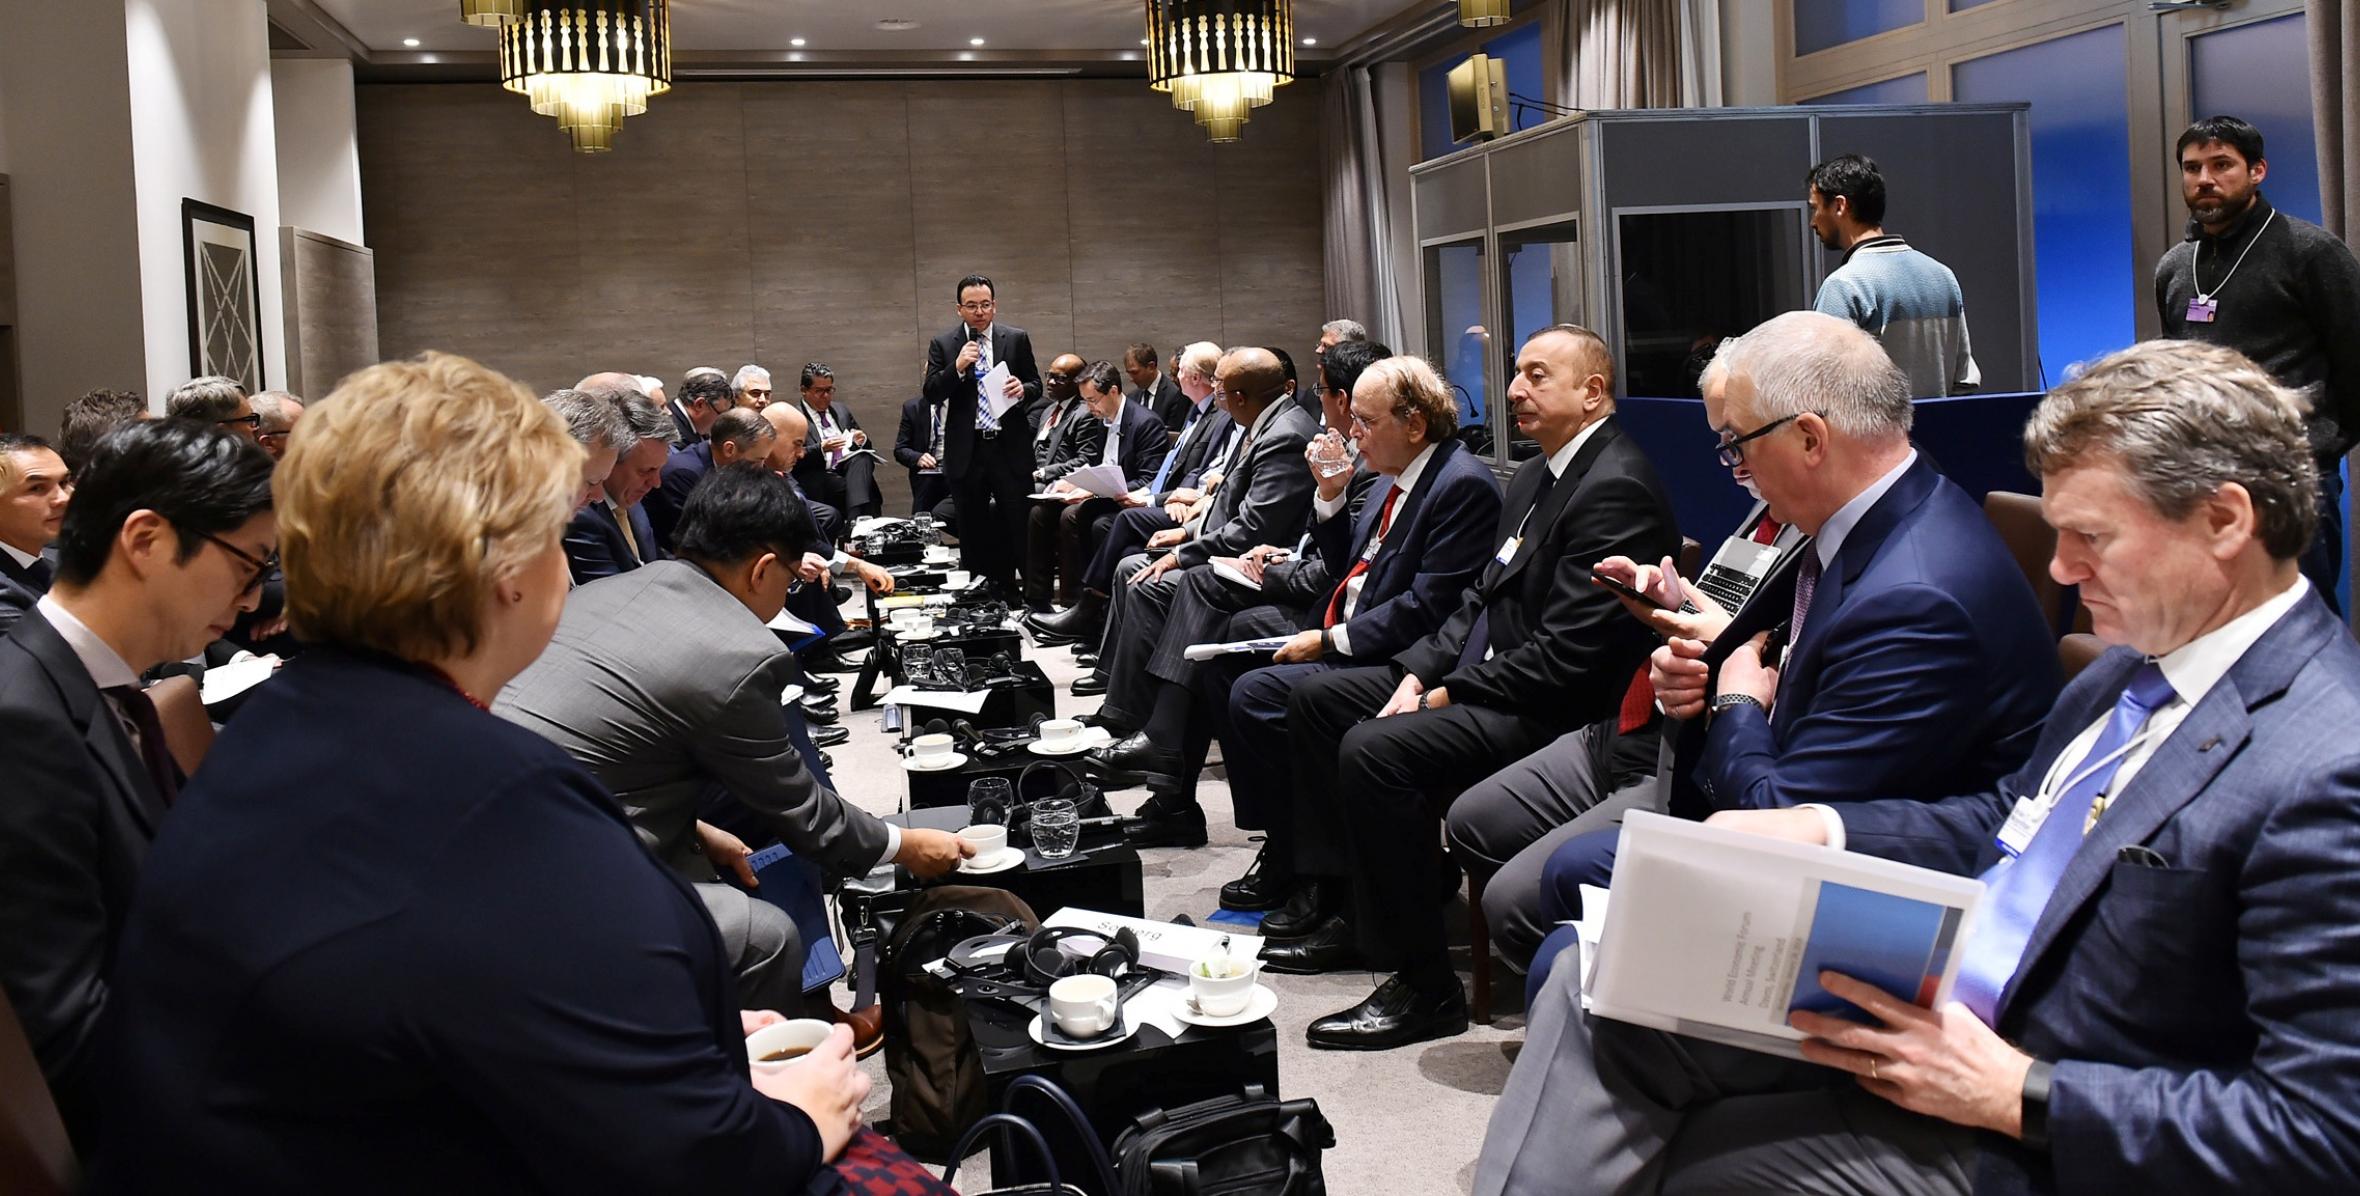 Ilham Aliyev has attended a session of oil and gas industry leaders as part of the World Economic Forum in Davos